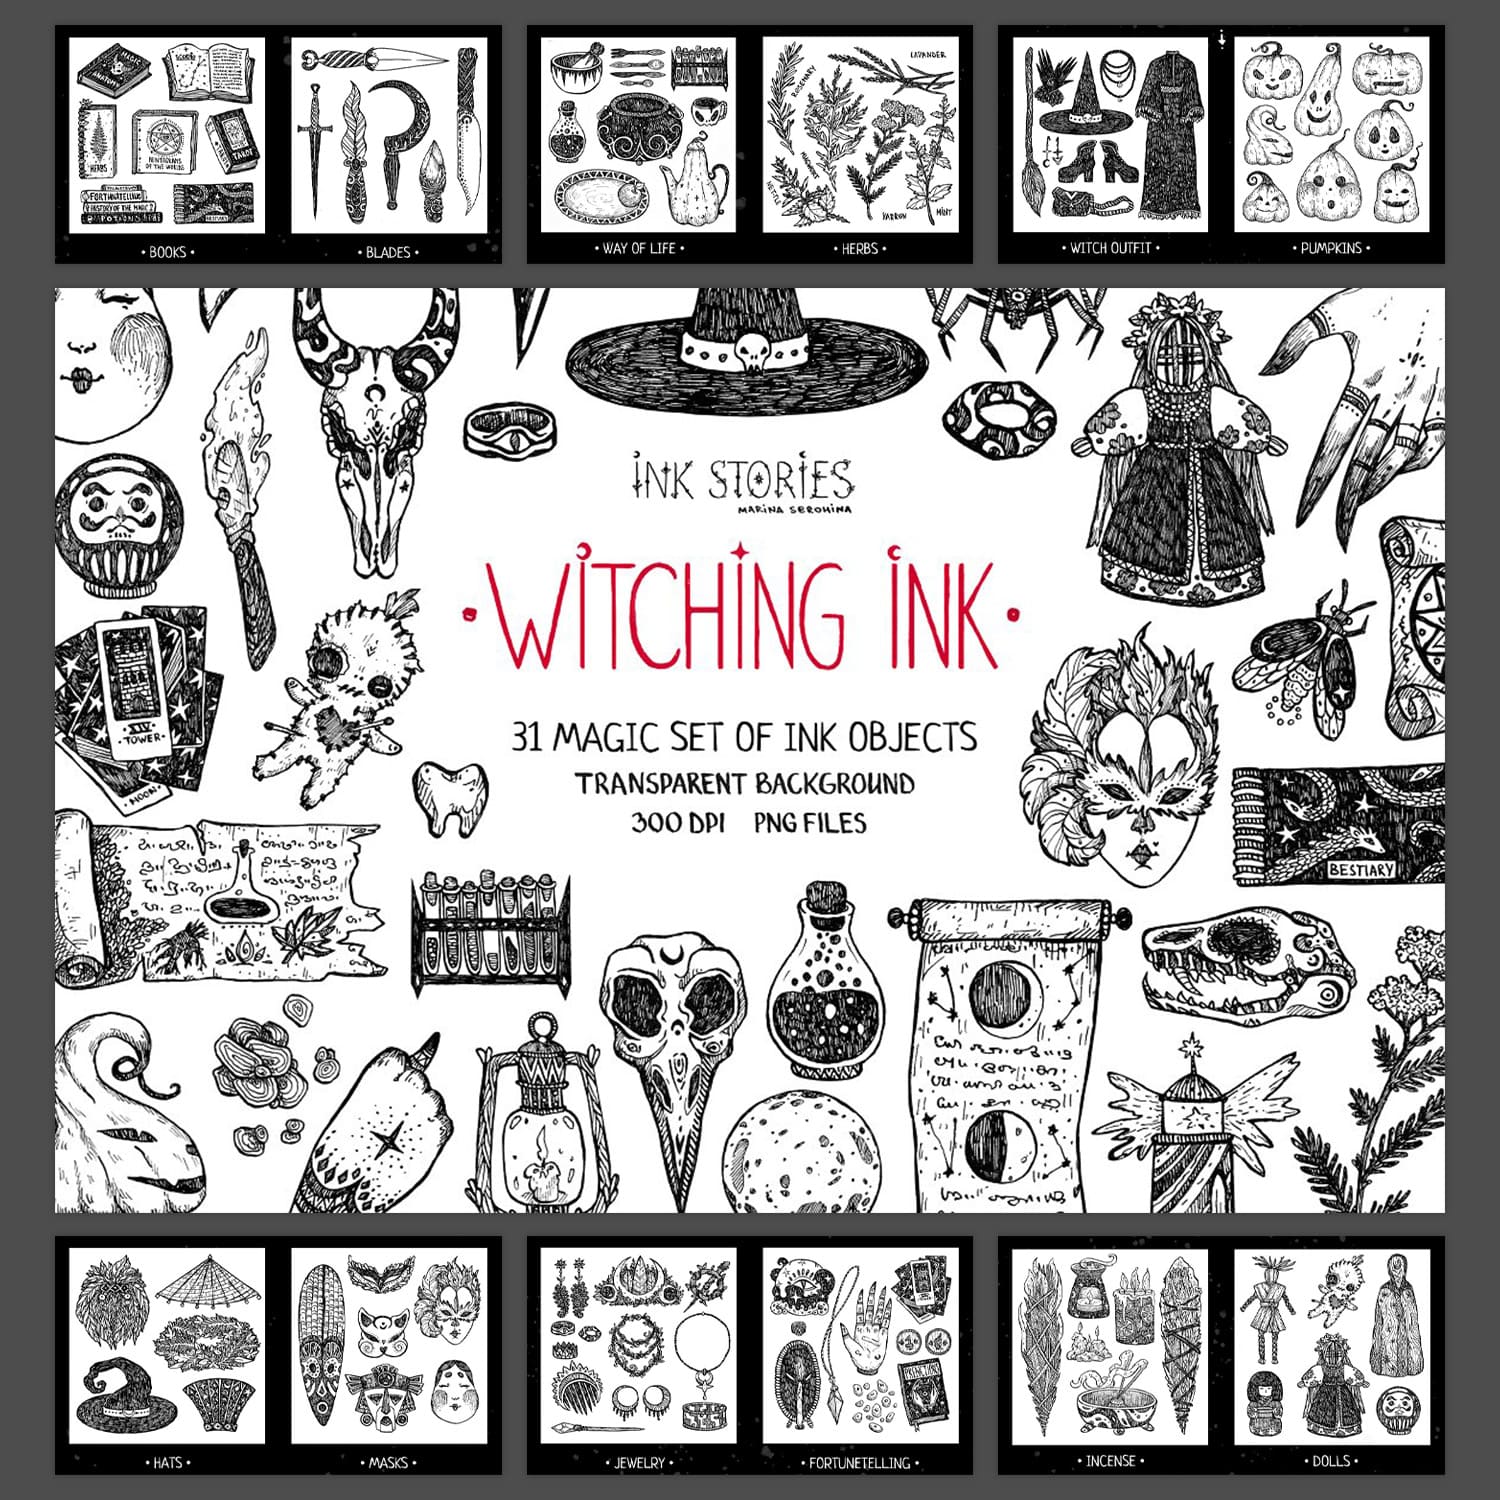 Witching Ink cover image.